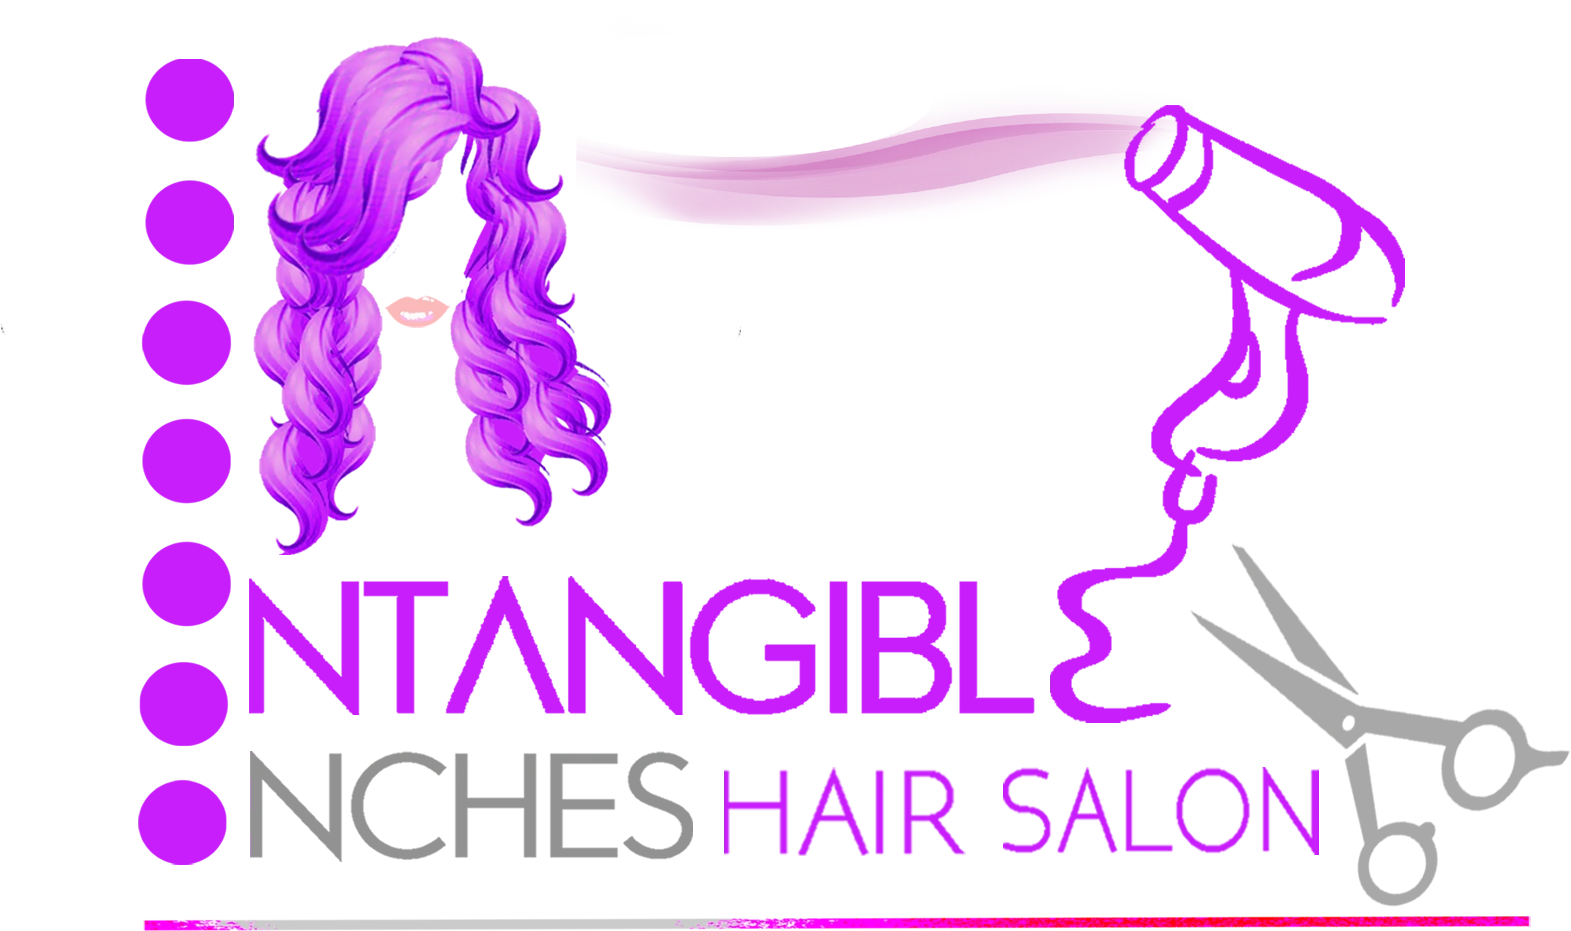 Intangible Inches Hair Salon Logo PNG